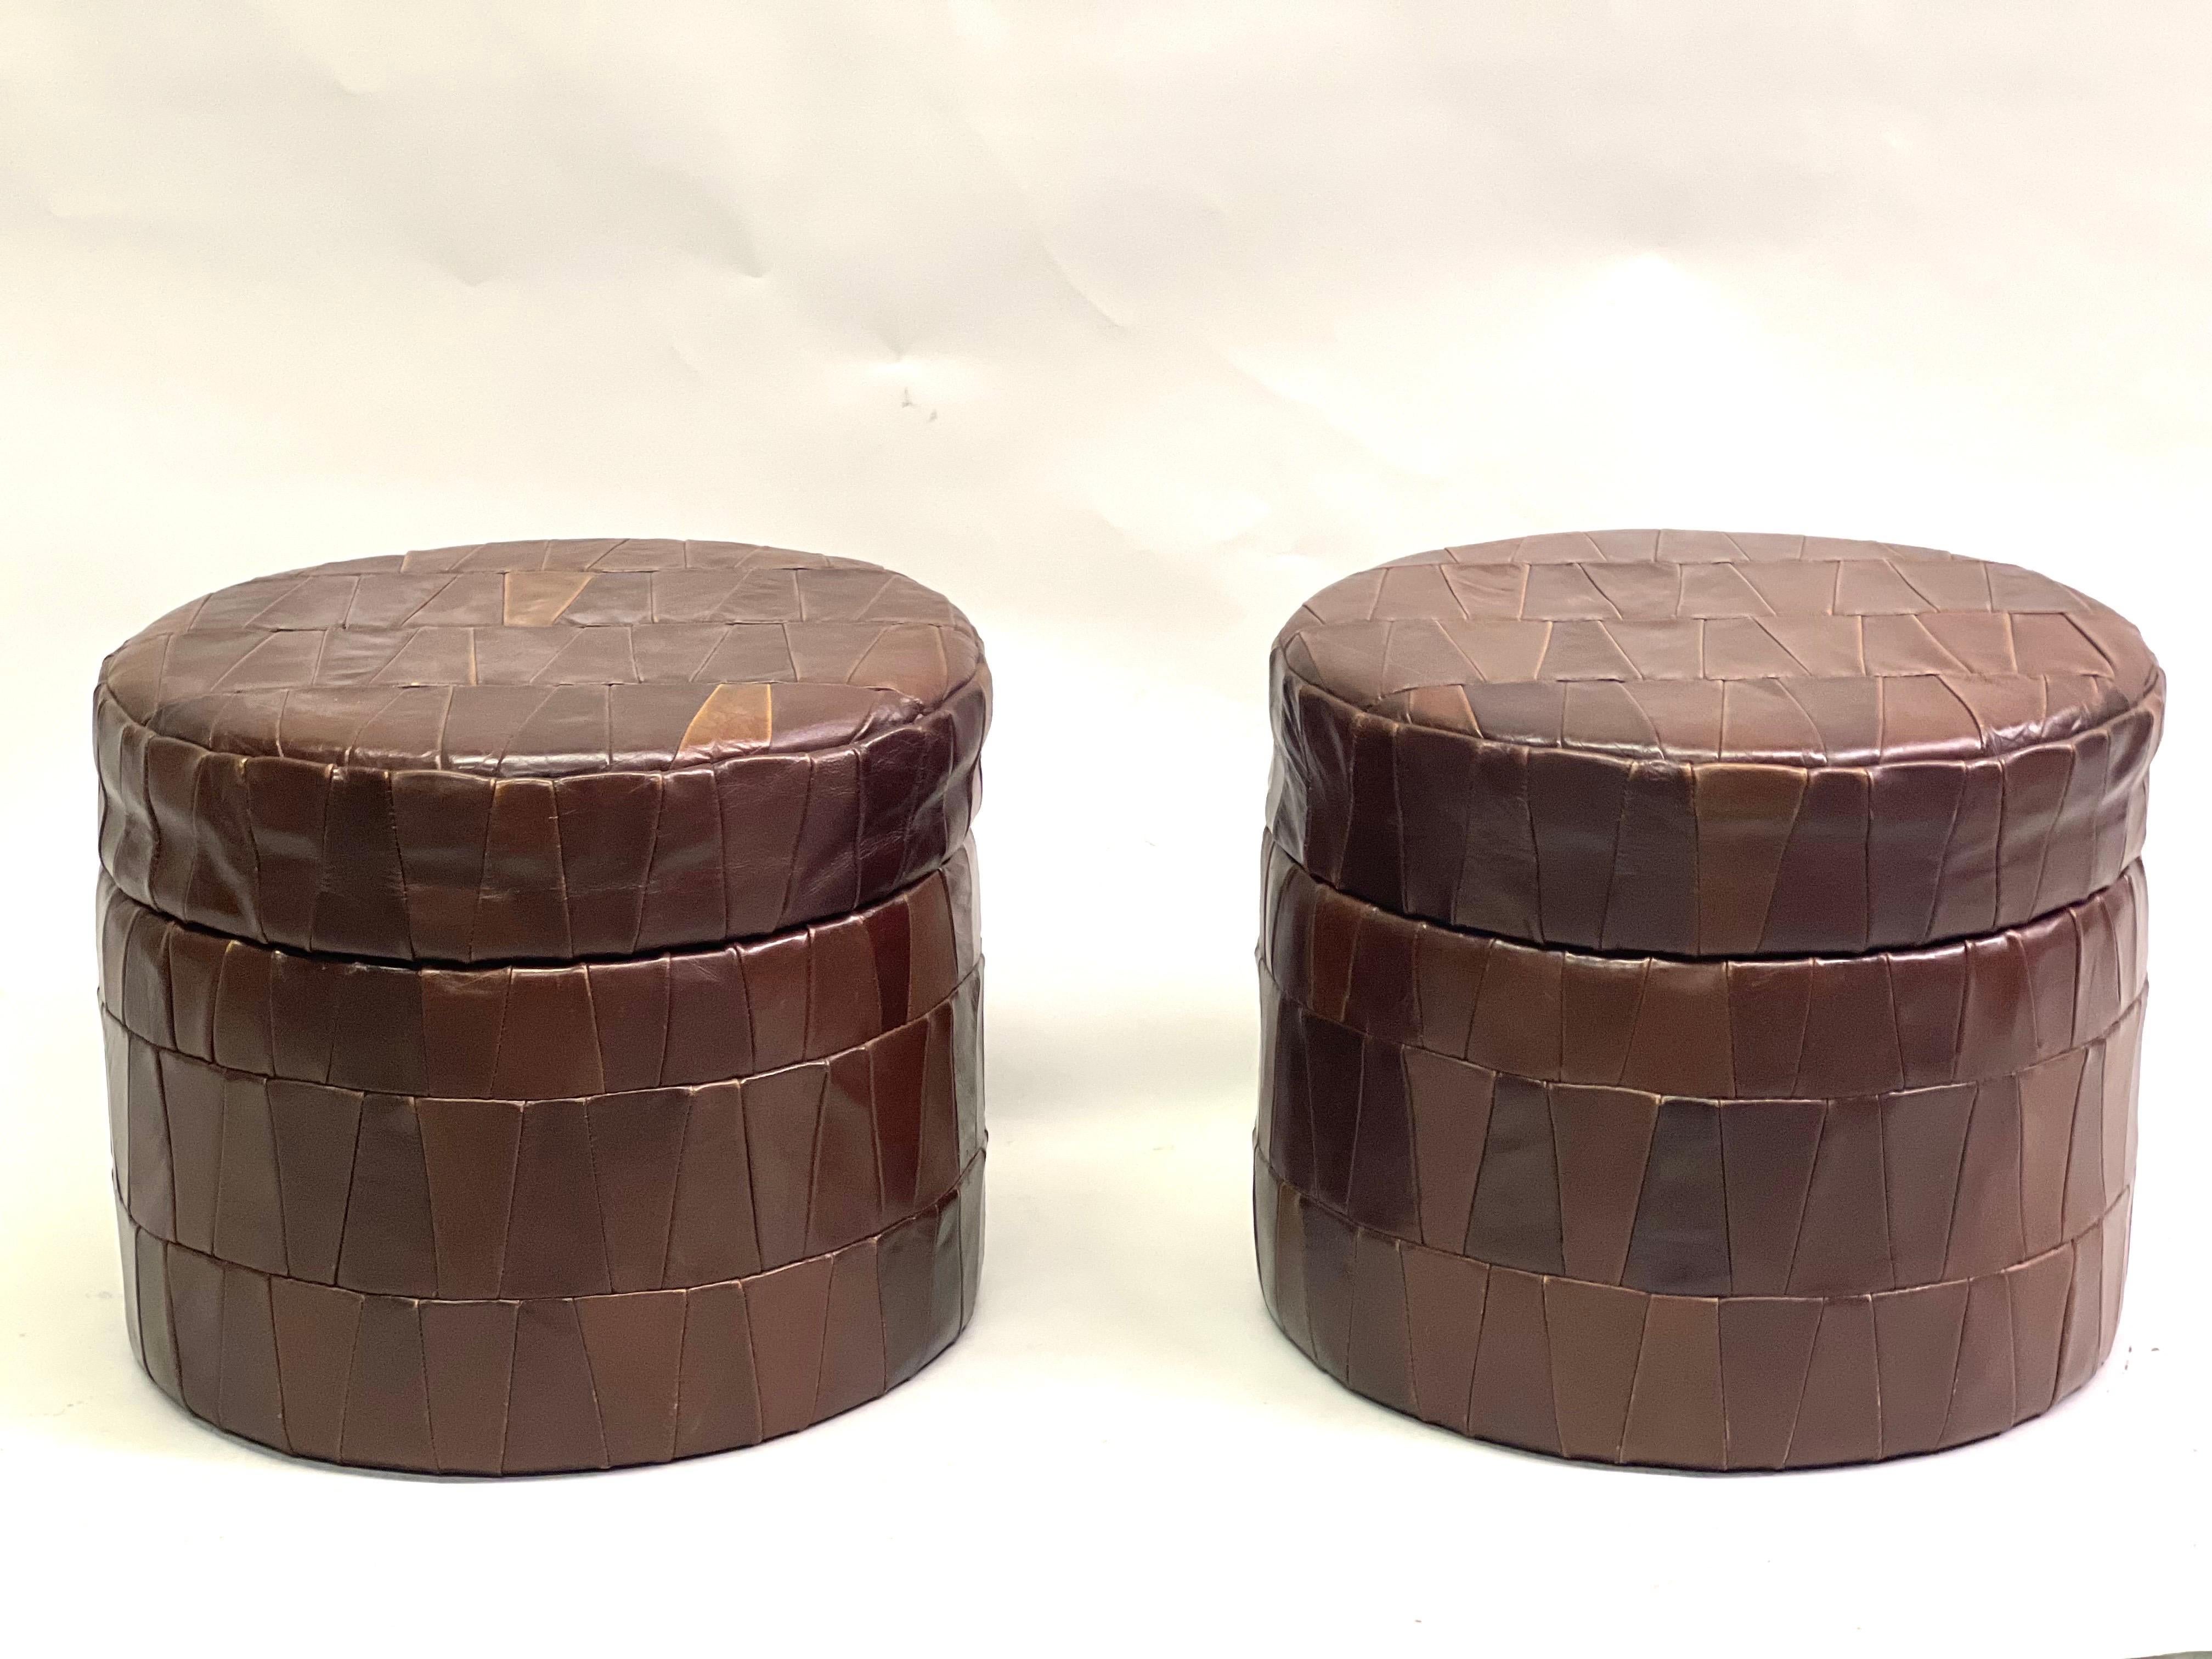 Pair of Swiss Modern Patchwork Leather Storage Ottomans/ Stools by De Sede, 1960 In Good Condition For Sale In New York, NY